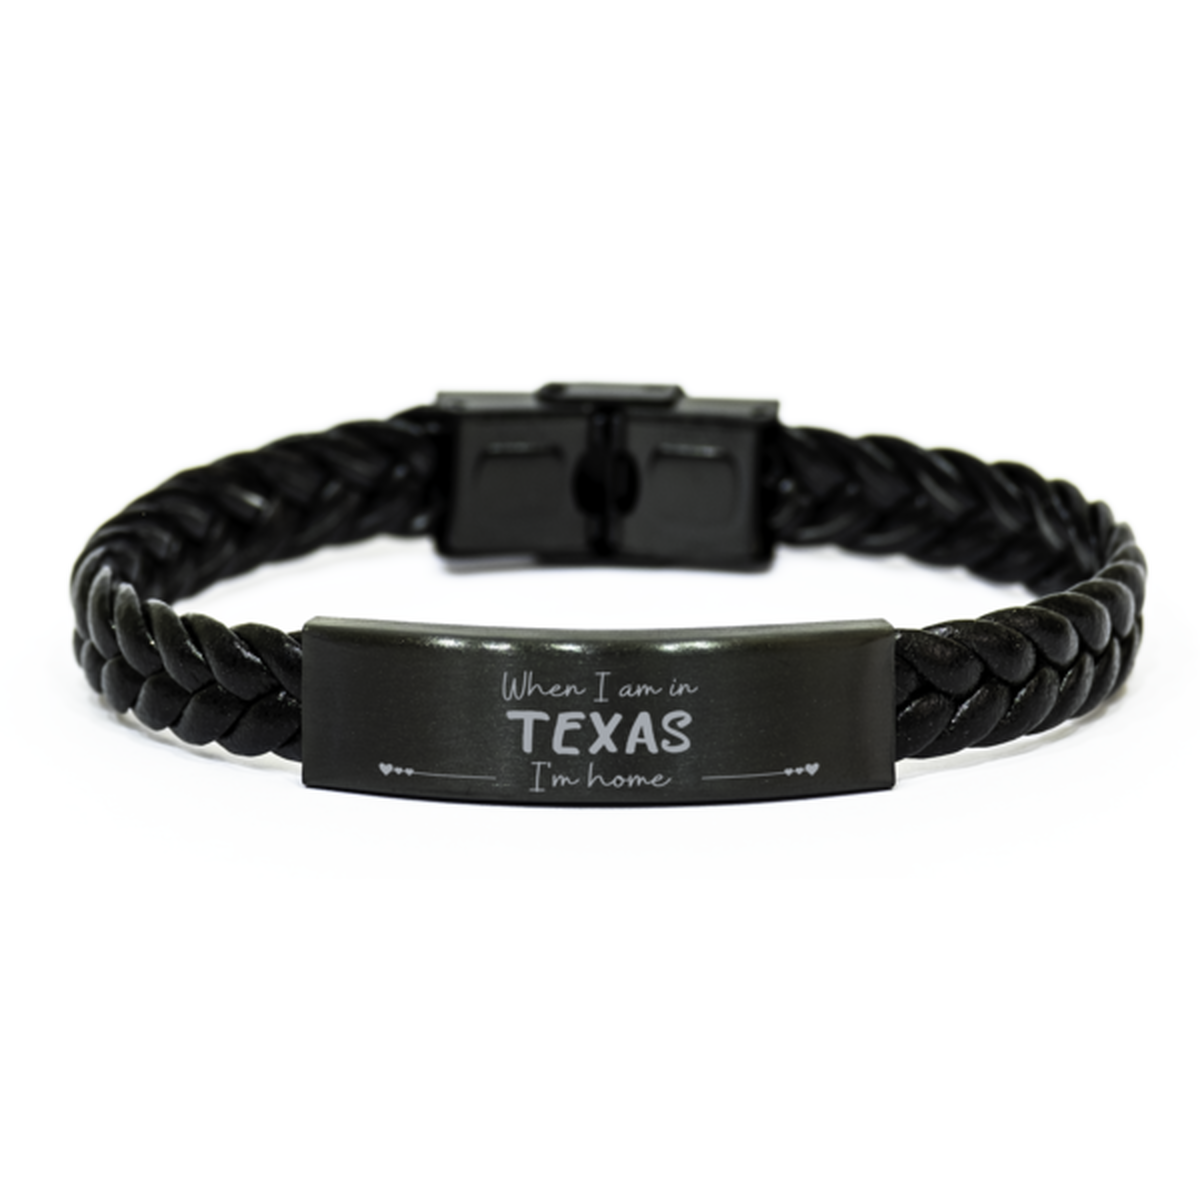 When I am in Texas I'm home Braided Leather Bracelet, Cheap Gifts For Texas, State Texas Birthday Gifts for Friends Coworker